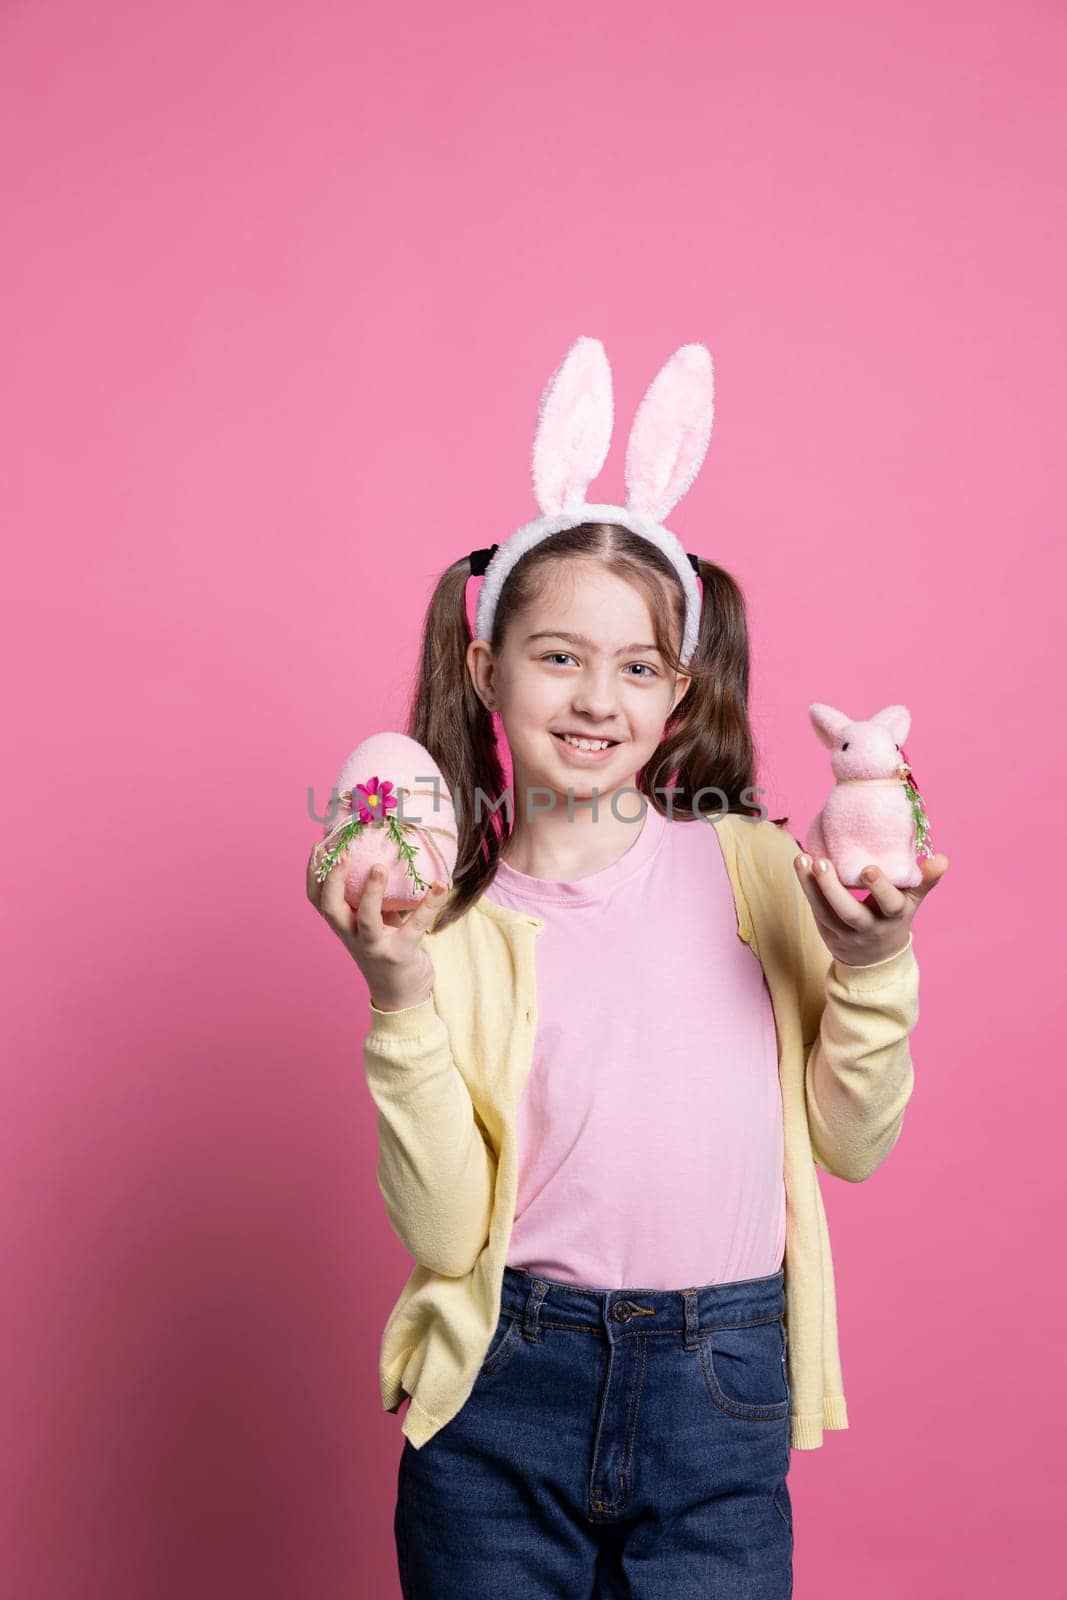 Joyful toddler presenting a pink egg and a stuffed rabbit in studio, wearing pigtails and cute bunny ears on camera. Smiling young kid showing her easter decorations and colorful toys.